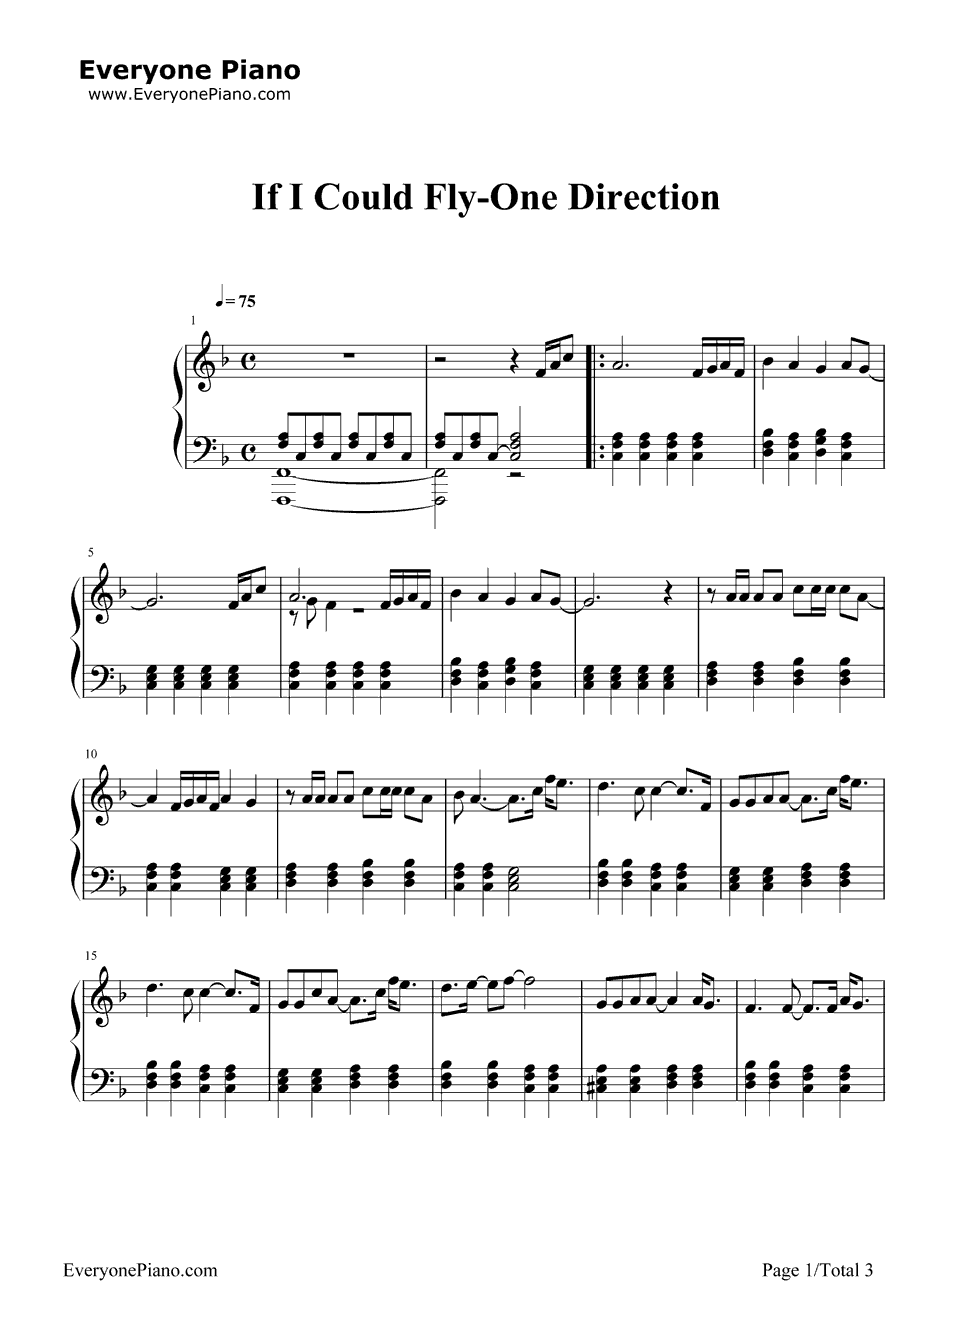 If I Could Fly钢琴谱-One Direction1